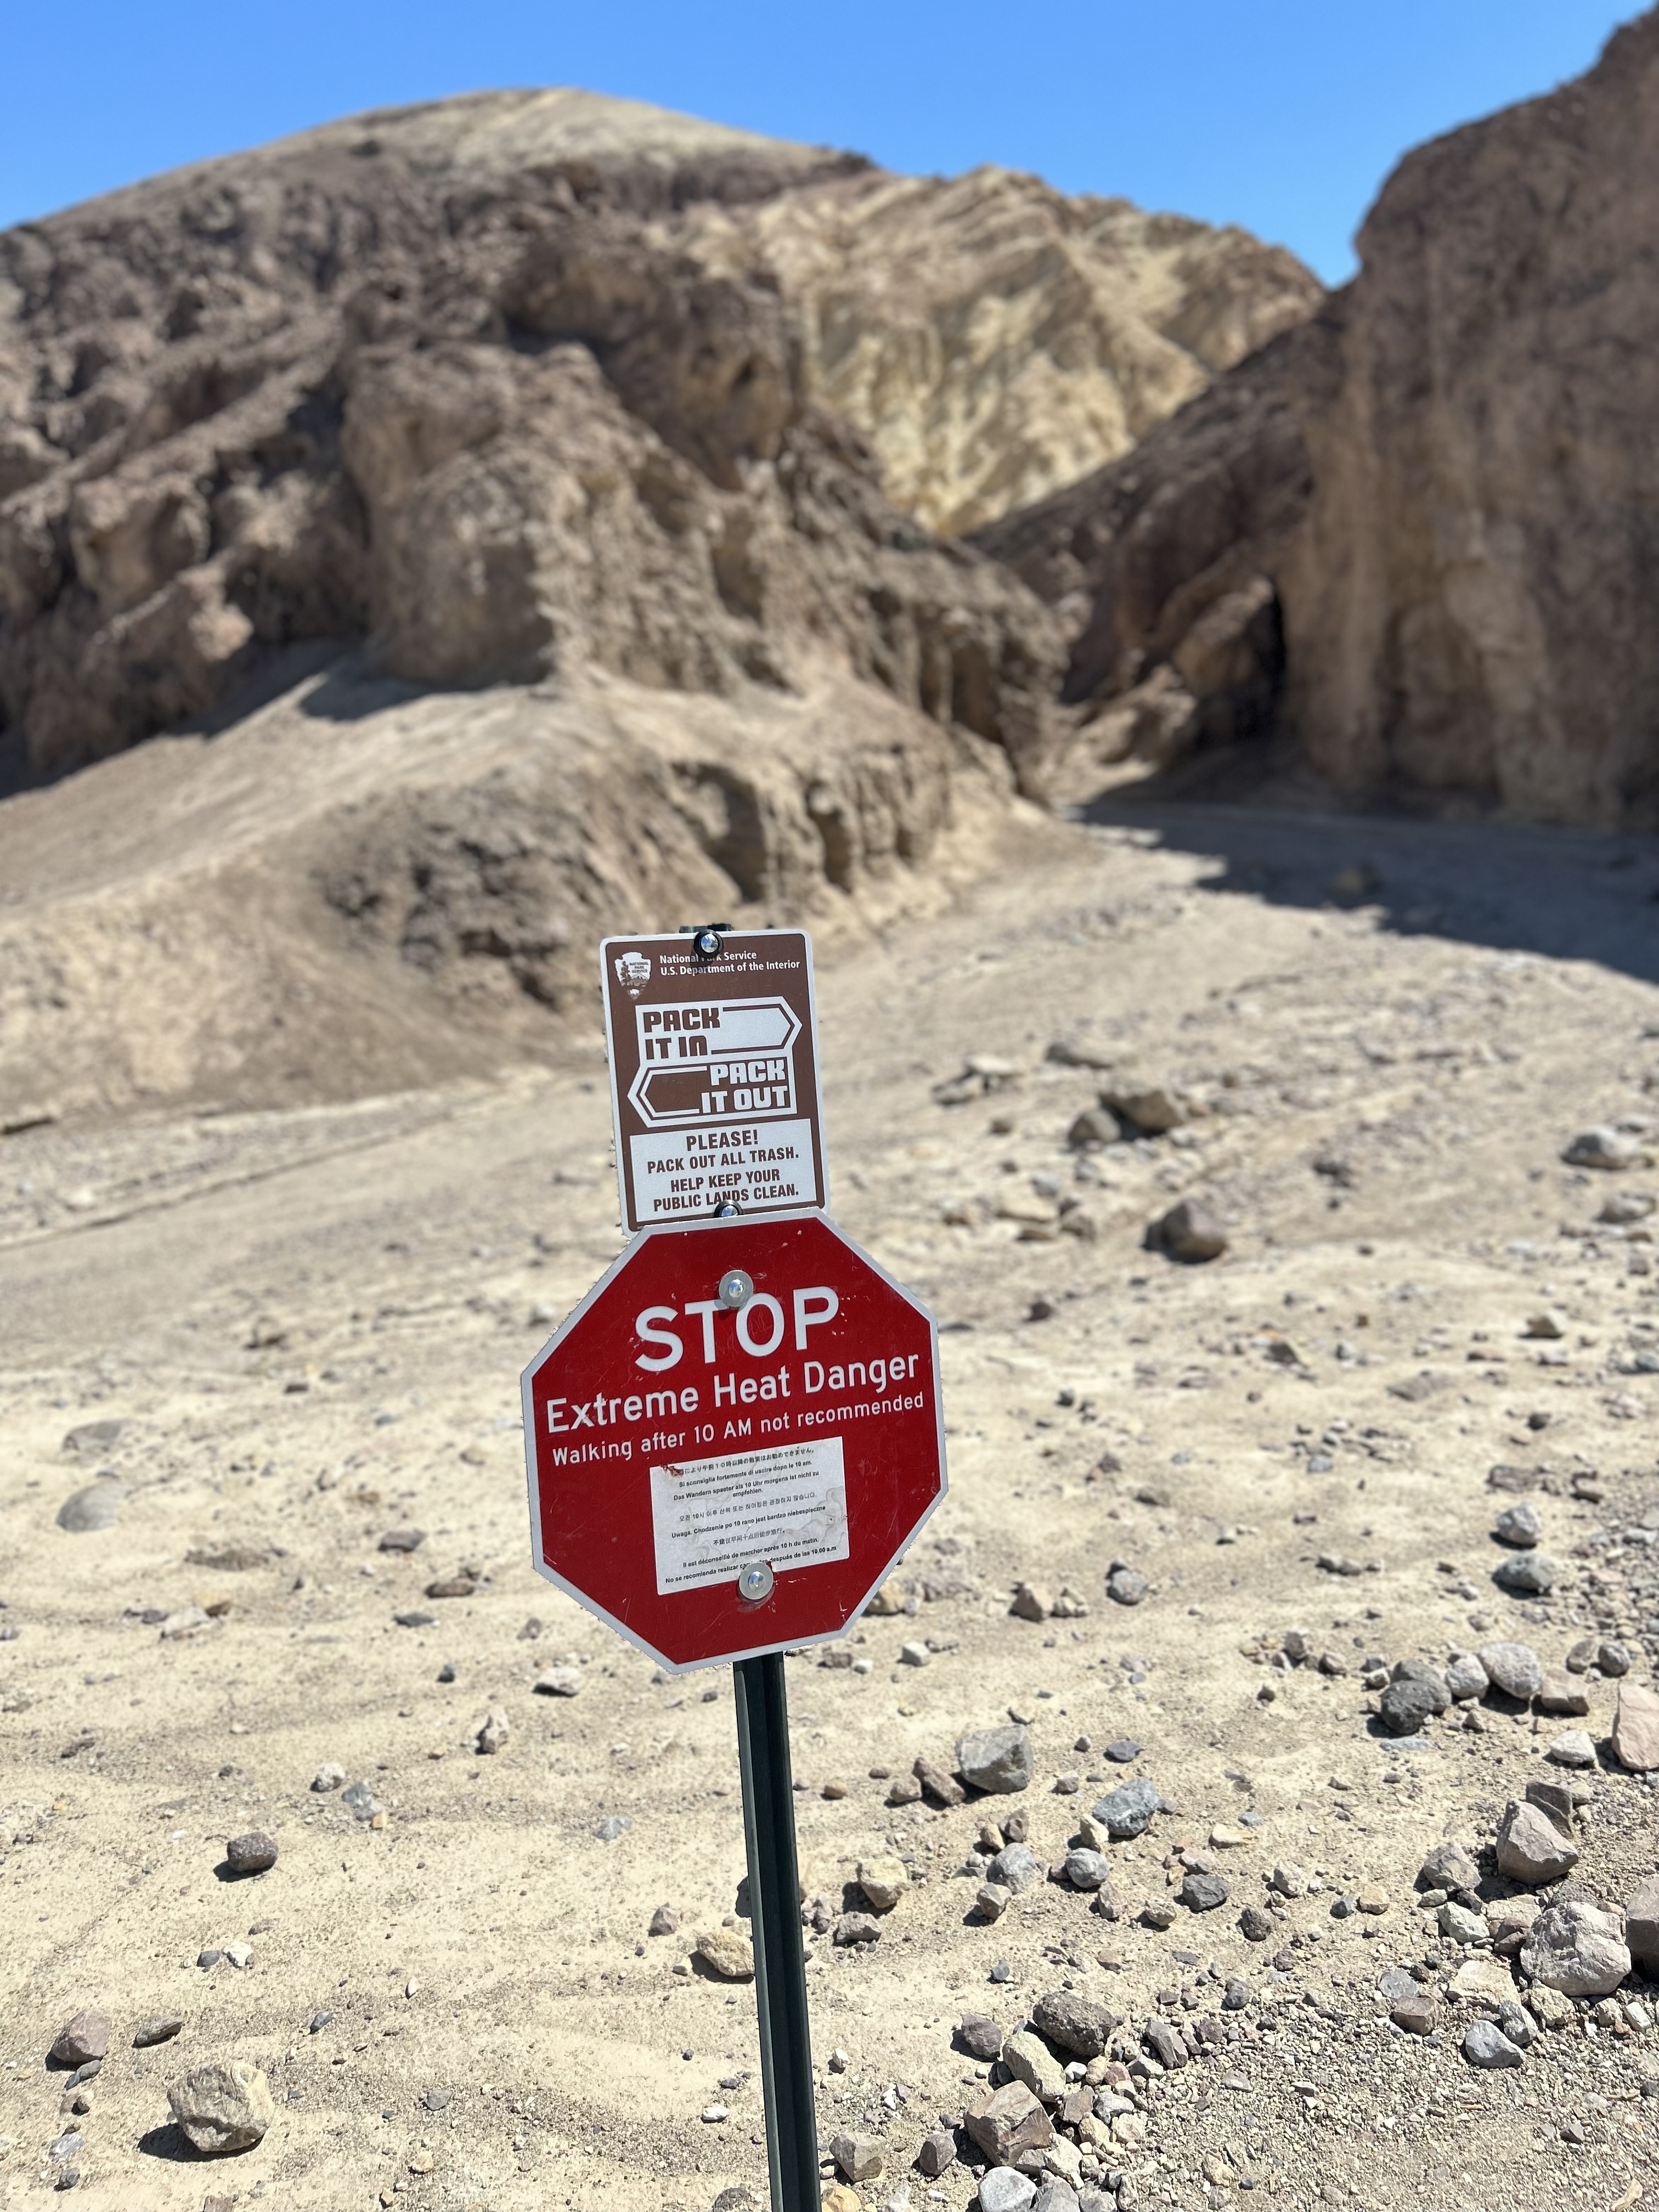 A post with signs reading "Pack it in, Pack it out" and "STOP. Extreme Heat Danger" is in front of bare rocky ground. "